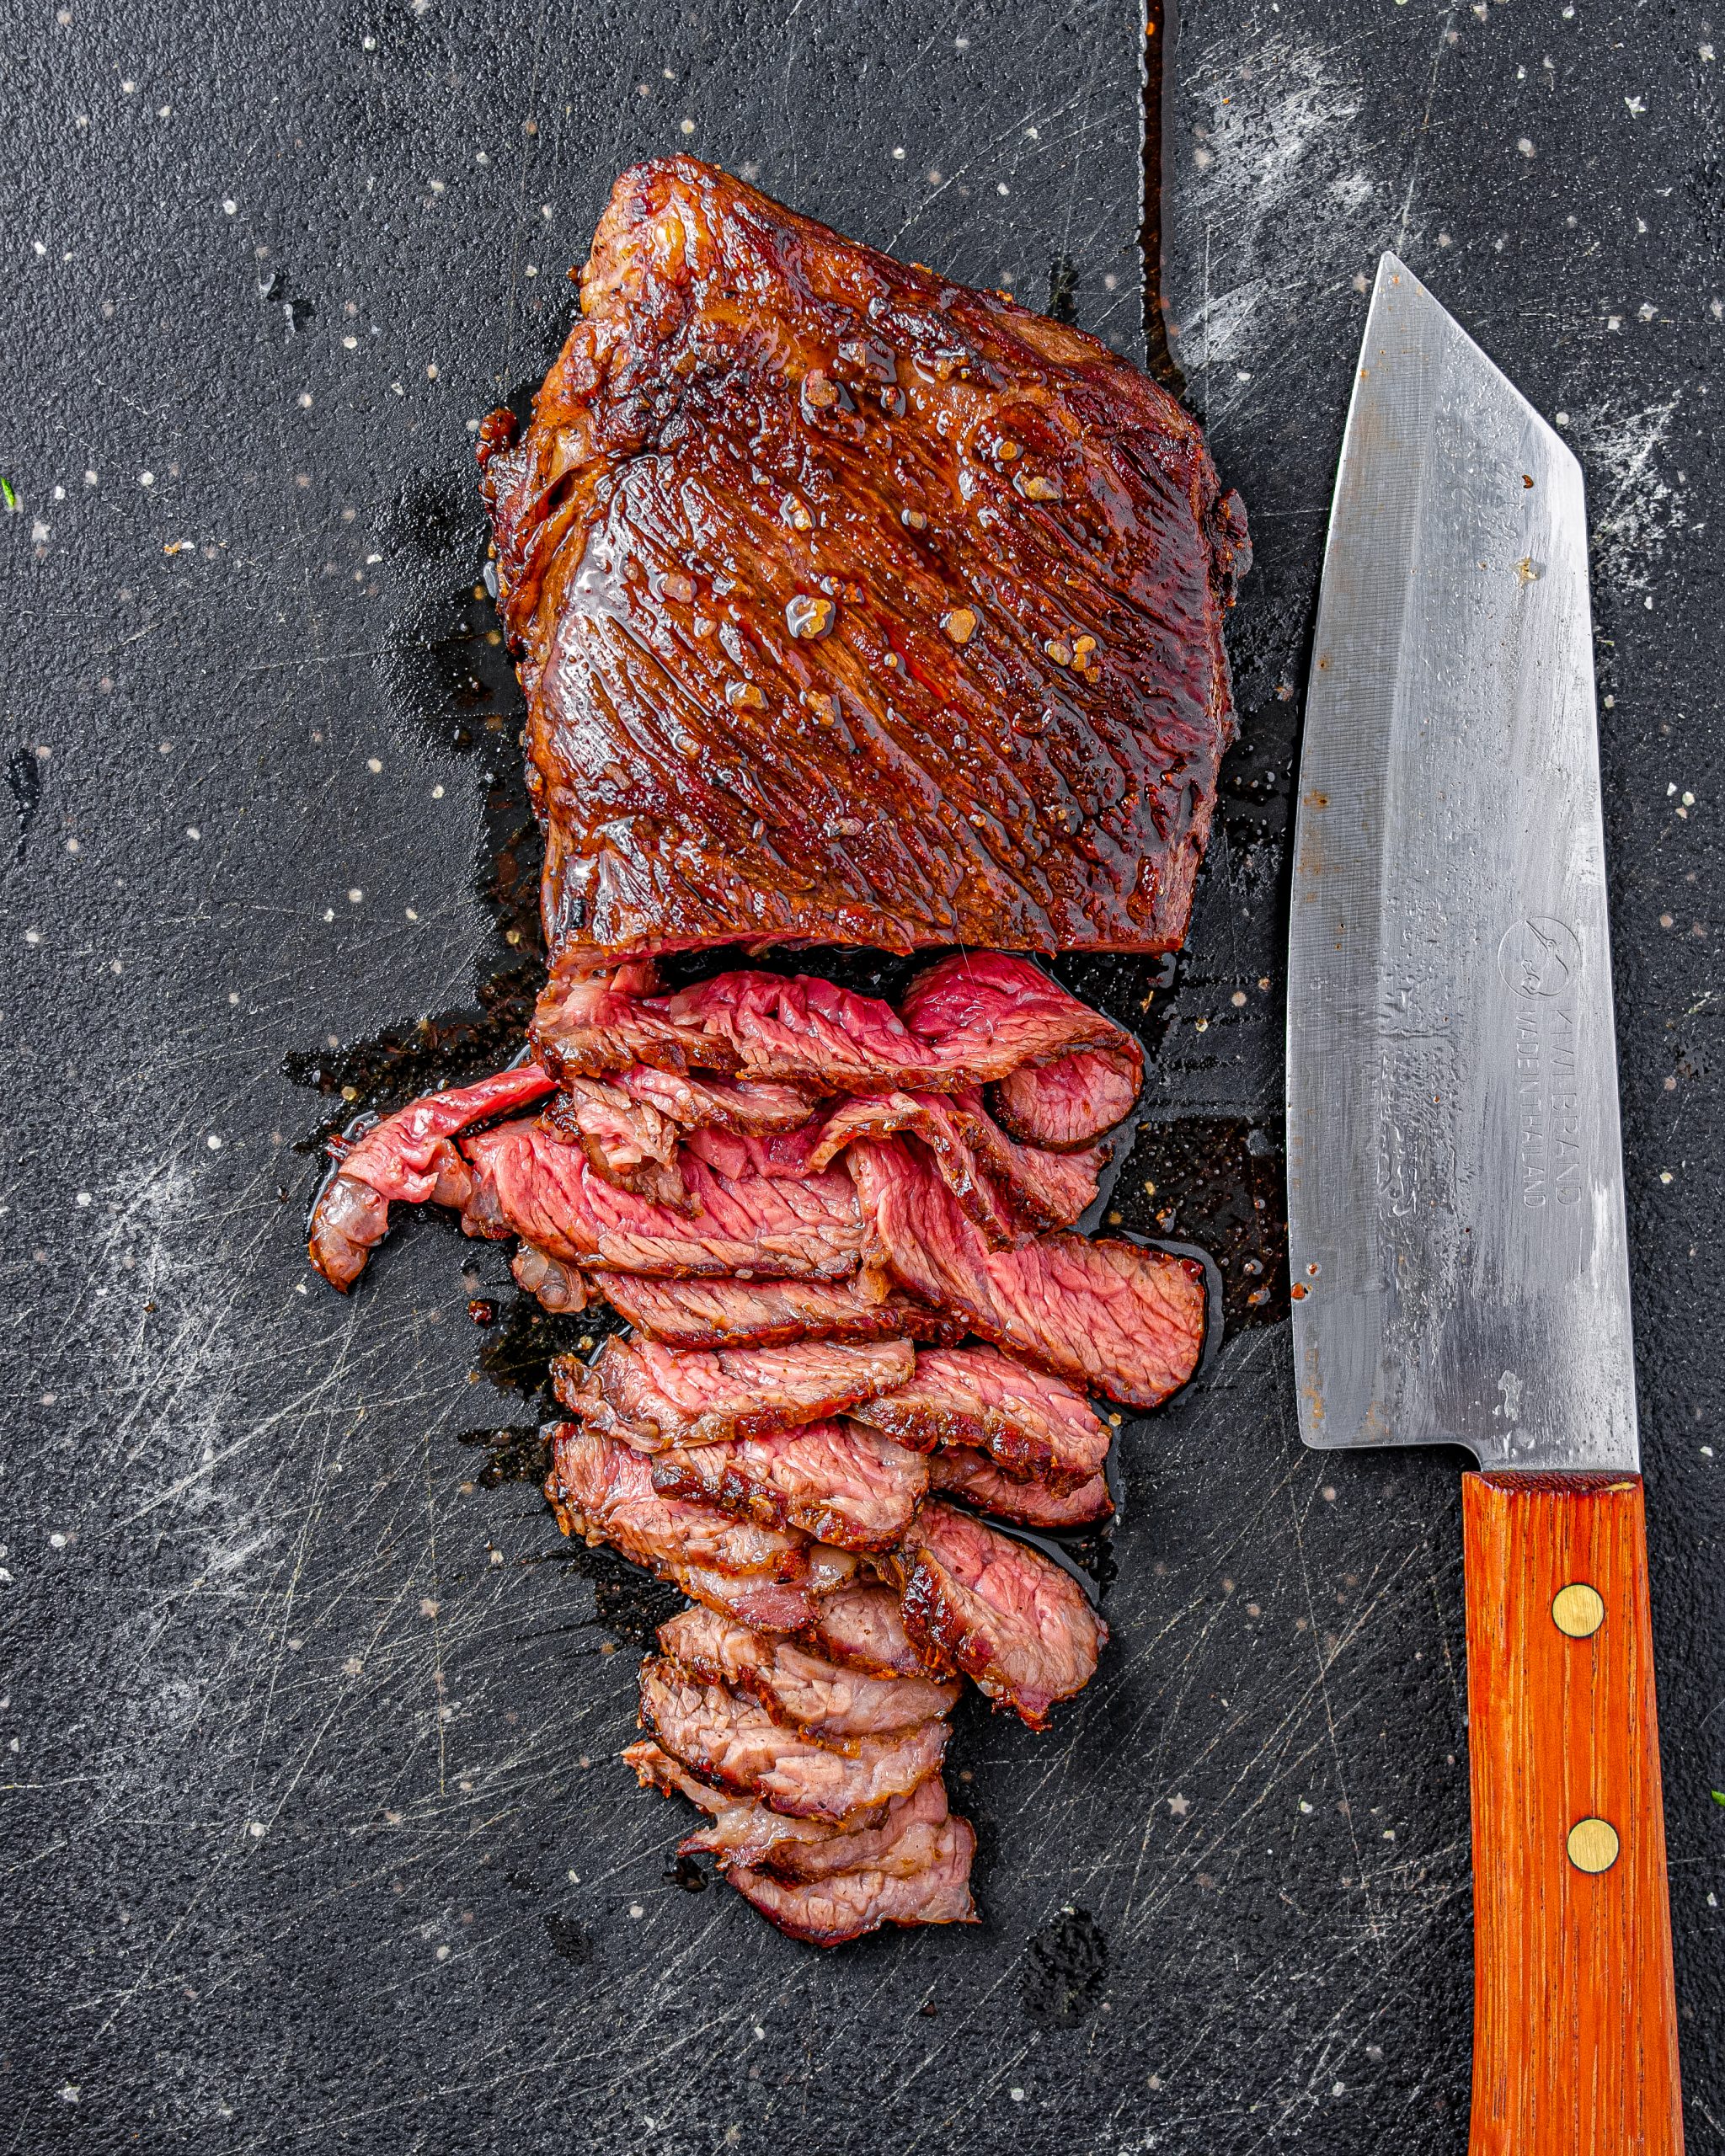 Remove the steak from the heat, let rest for 5 minutes, and slice very thinly.